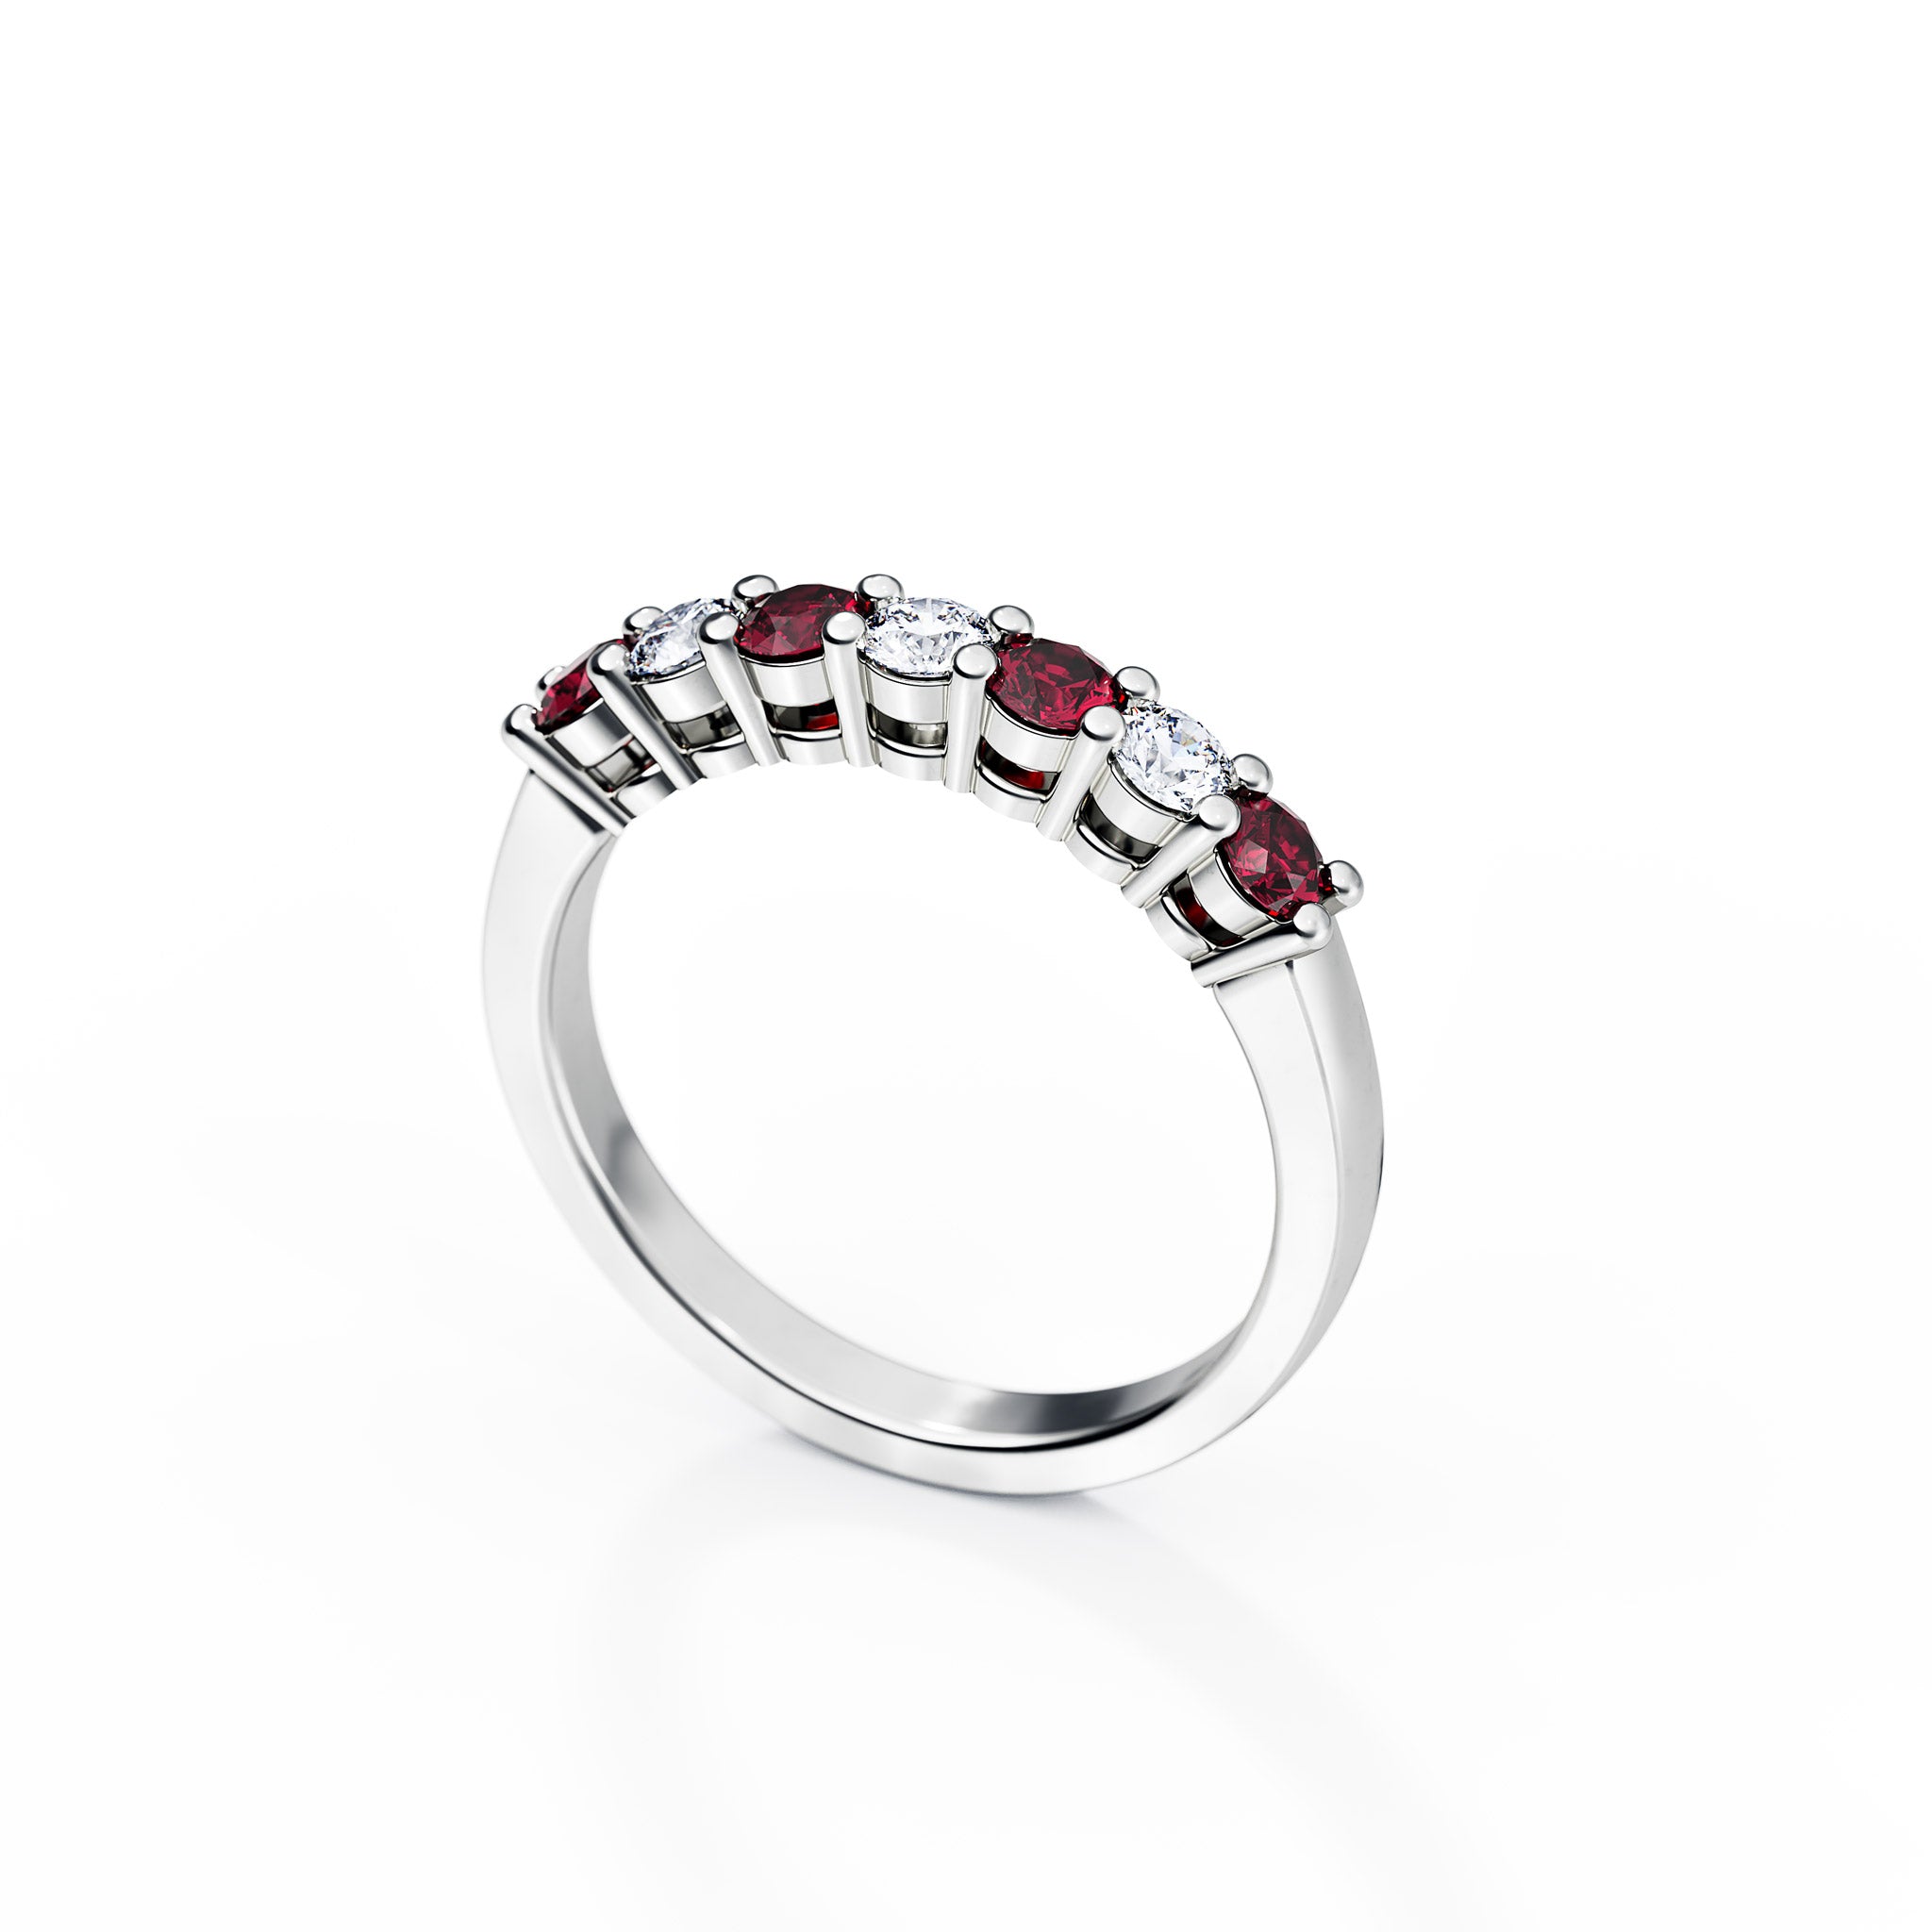 Diamond and Ruby Half Eternity Ring Band 14k White Gold